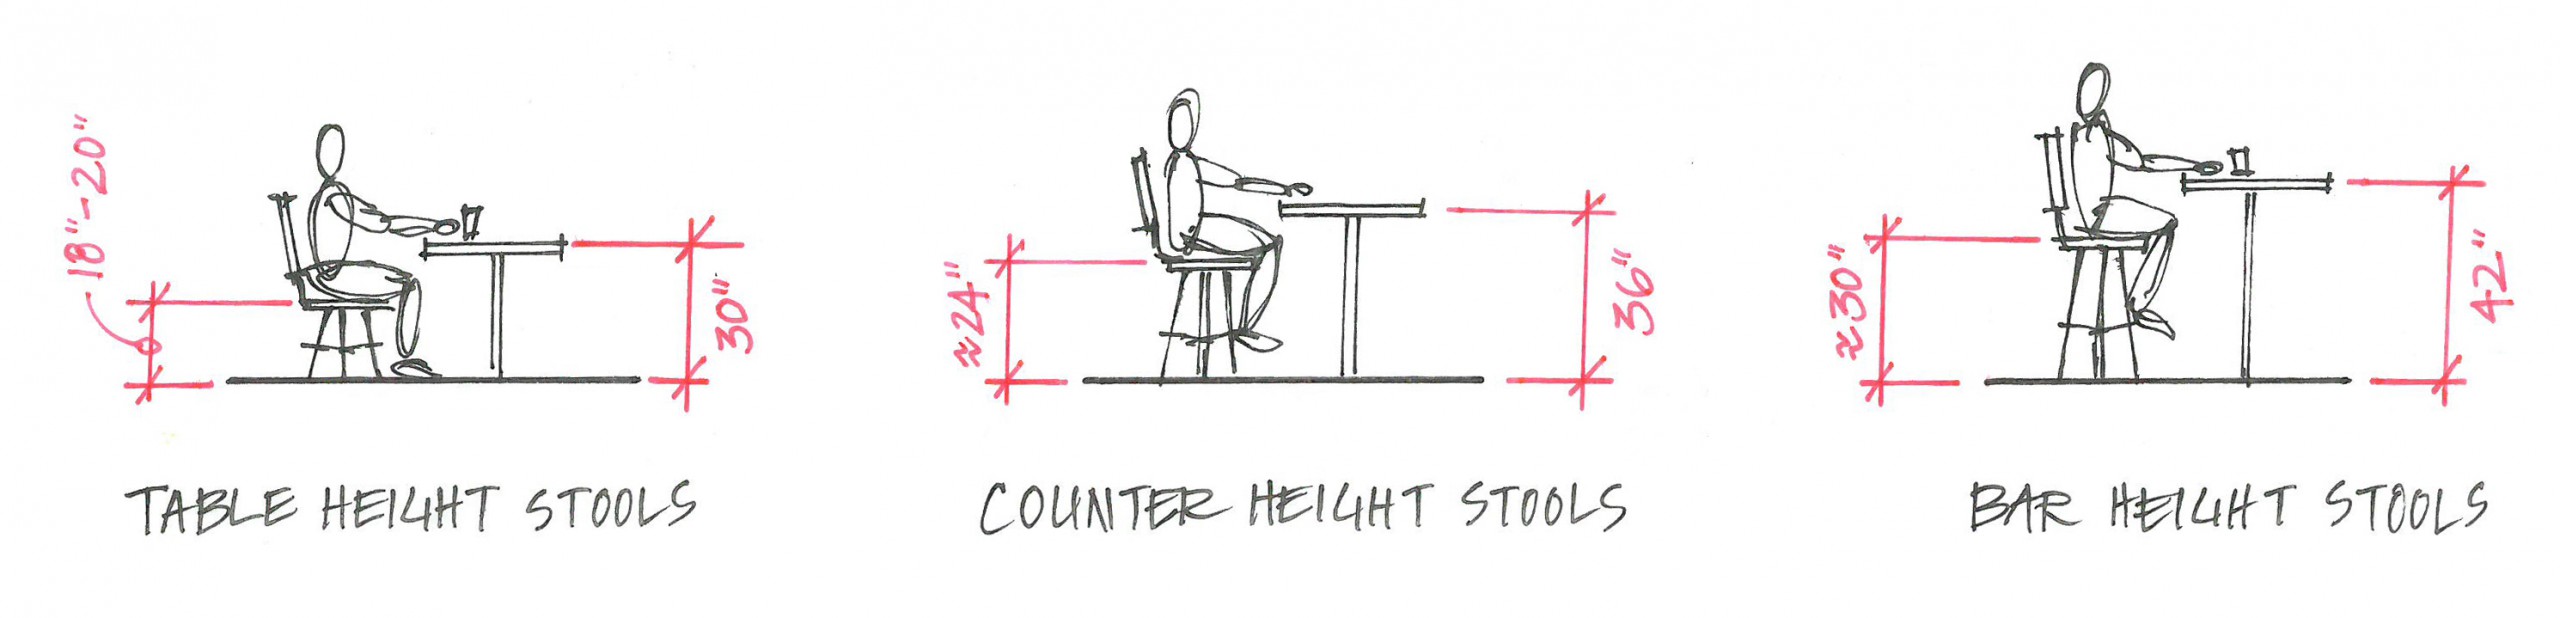 What height of stool do you need for table height, counter height or ...